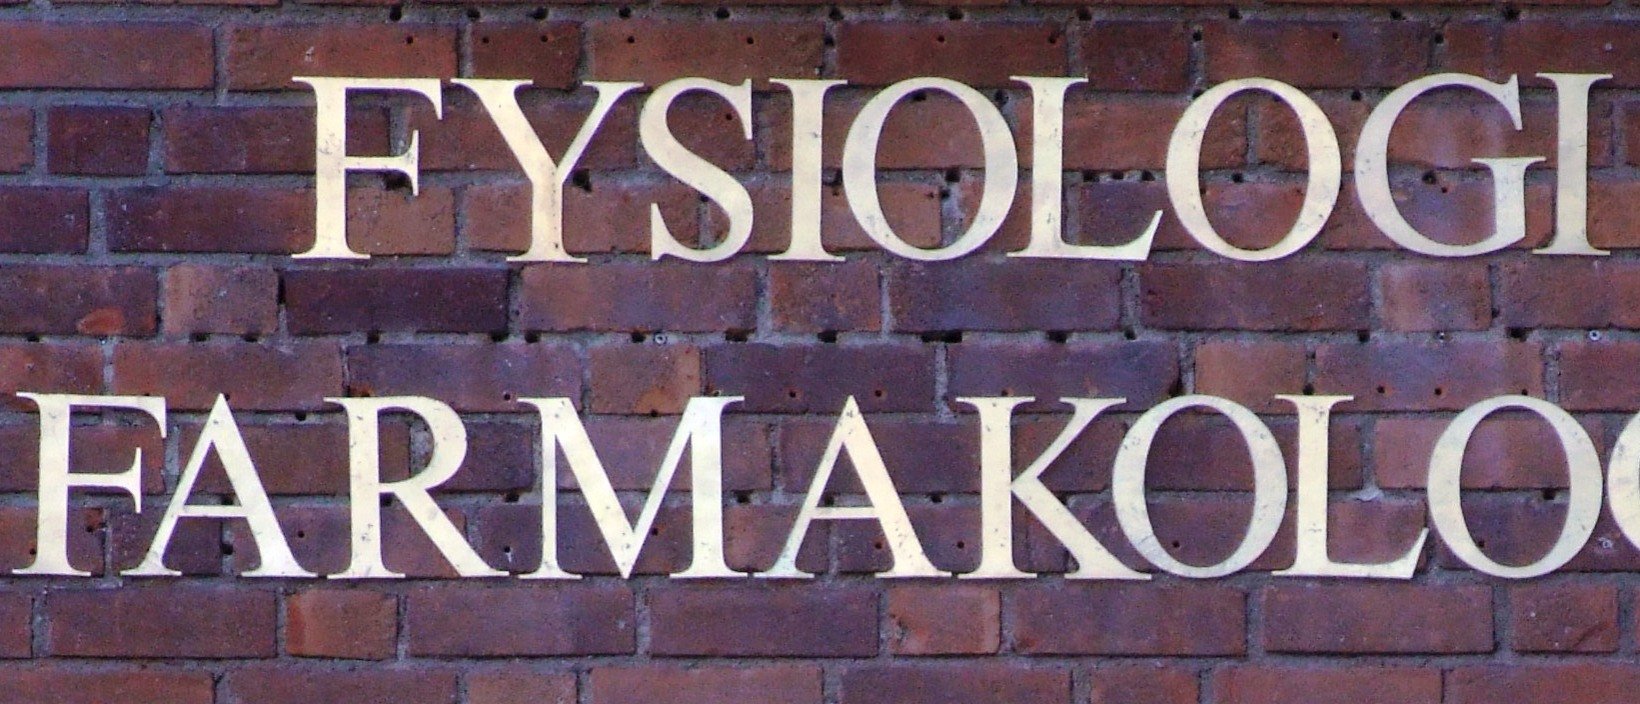 fyfa sign (letters) on brick wall